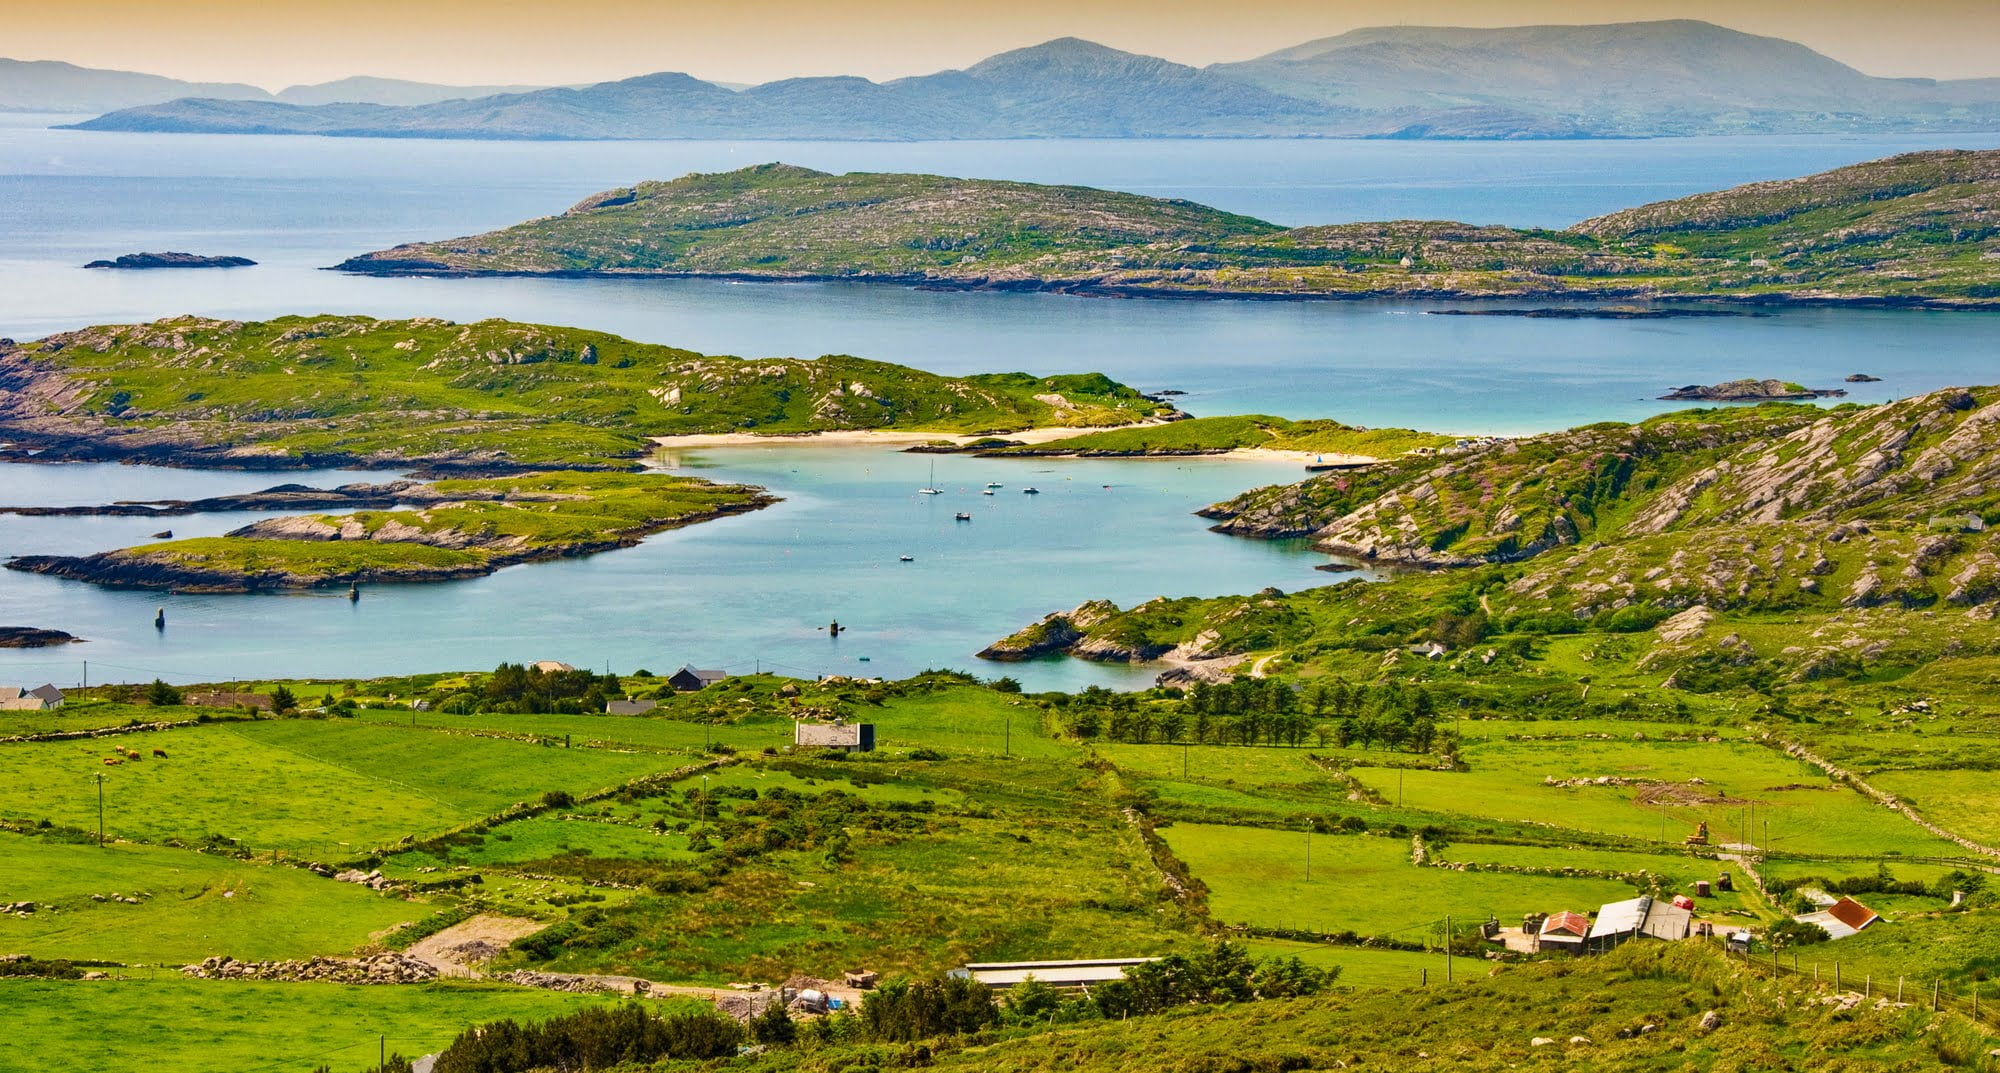 Beautiful scenic rural landscape from Ring of Kerry ireland